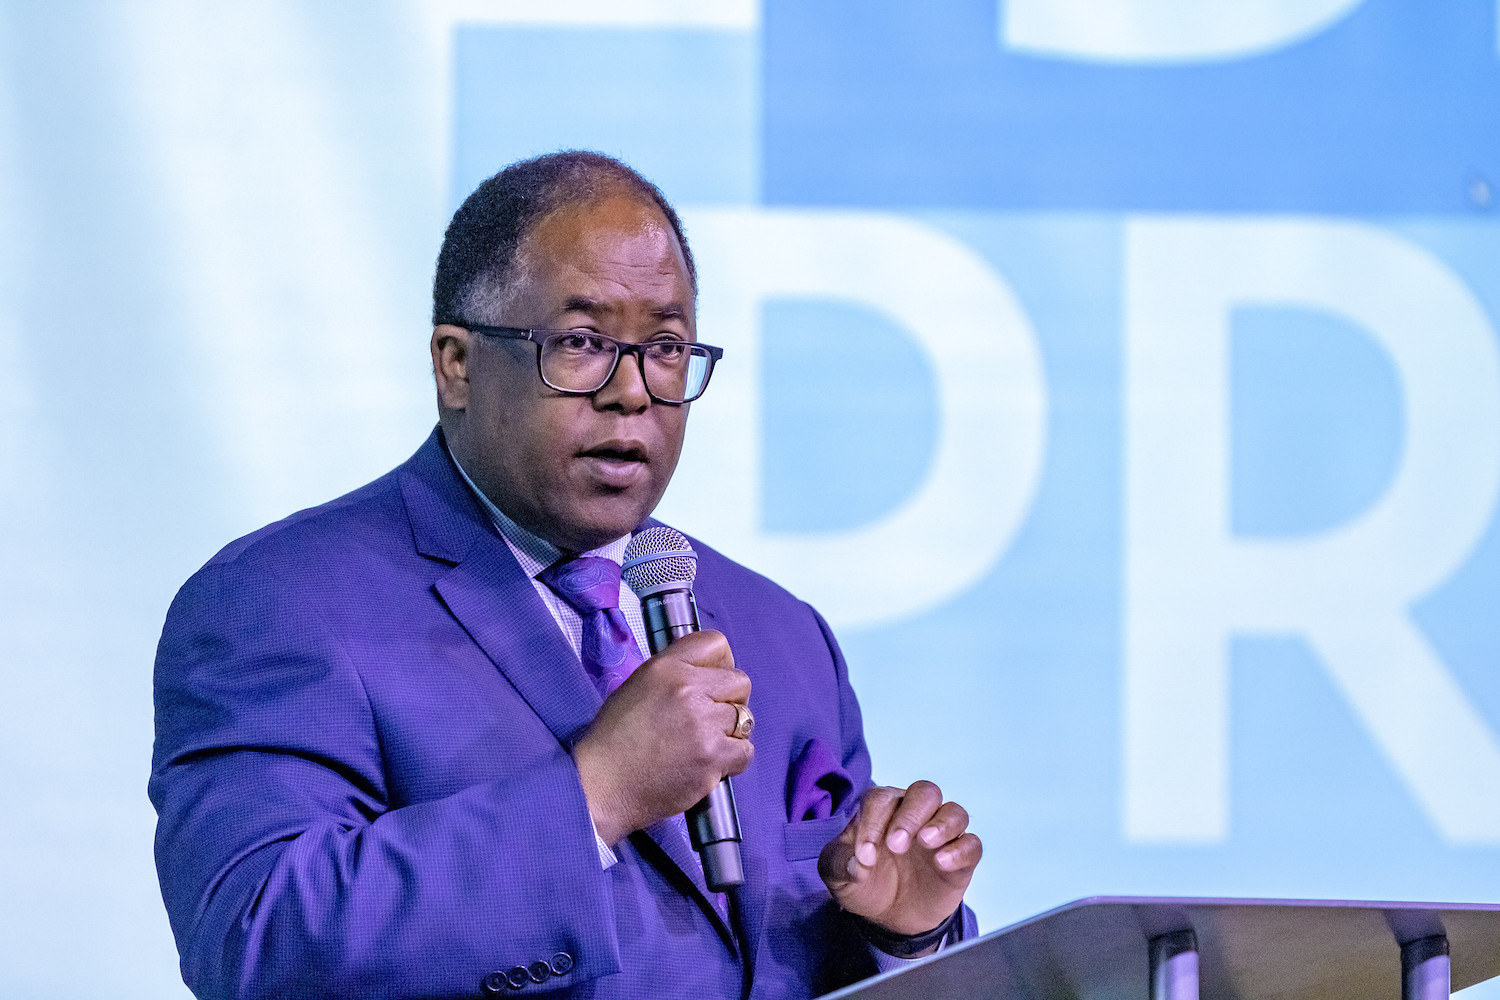 The region's response to homelessness will "define our civic legacy in the eyes of future generations,” says Los Angeles County Supervisor Mark Ridley-Thomas. Photo by Les Dunseith